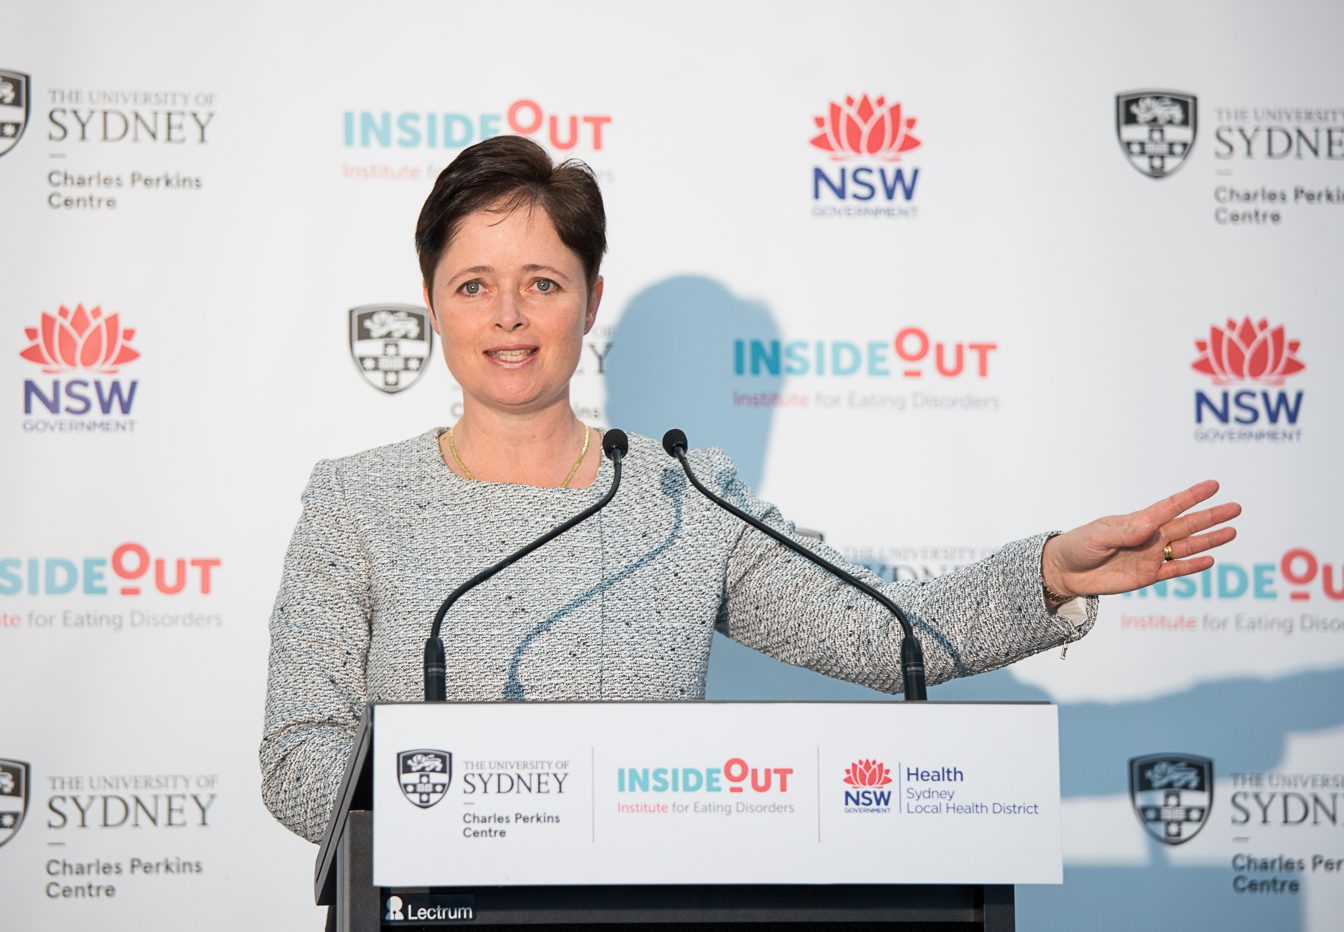 Hon Tanya Davies MP, NSW Minister for Mental Health, launches the InsideOut Institute